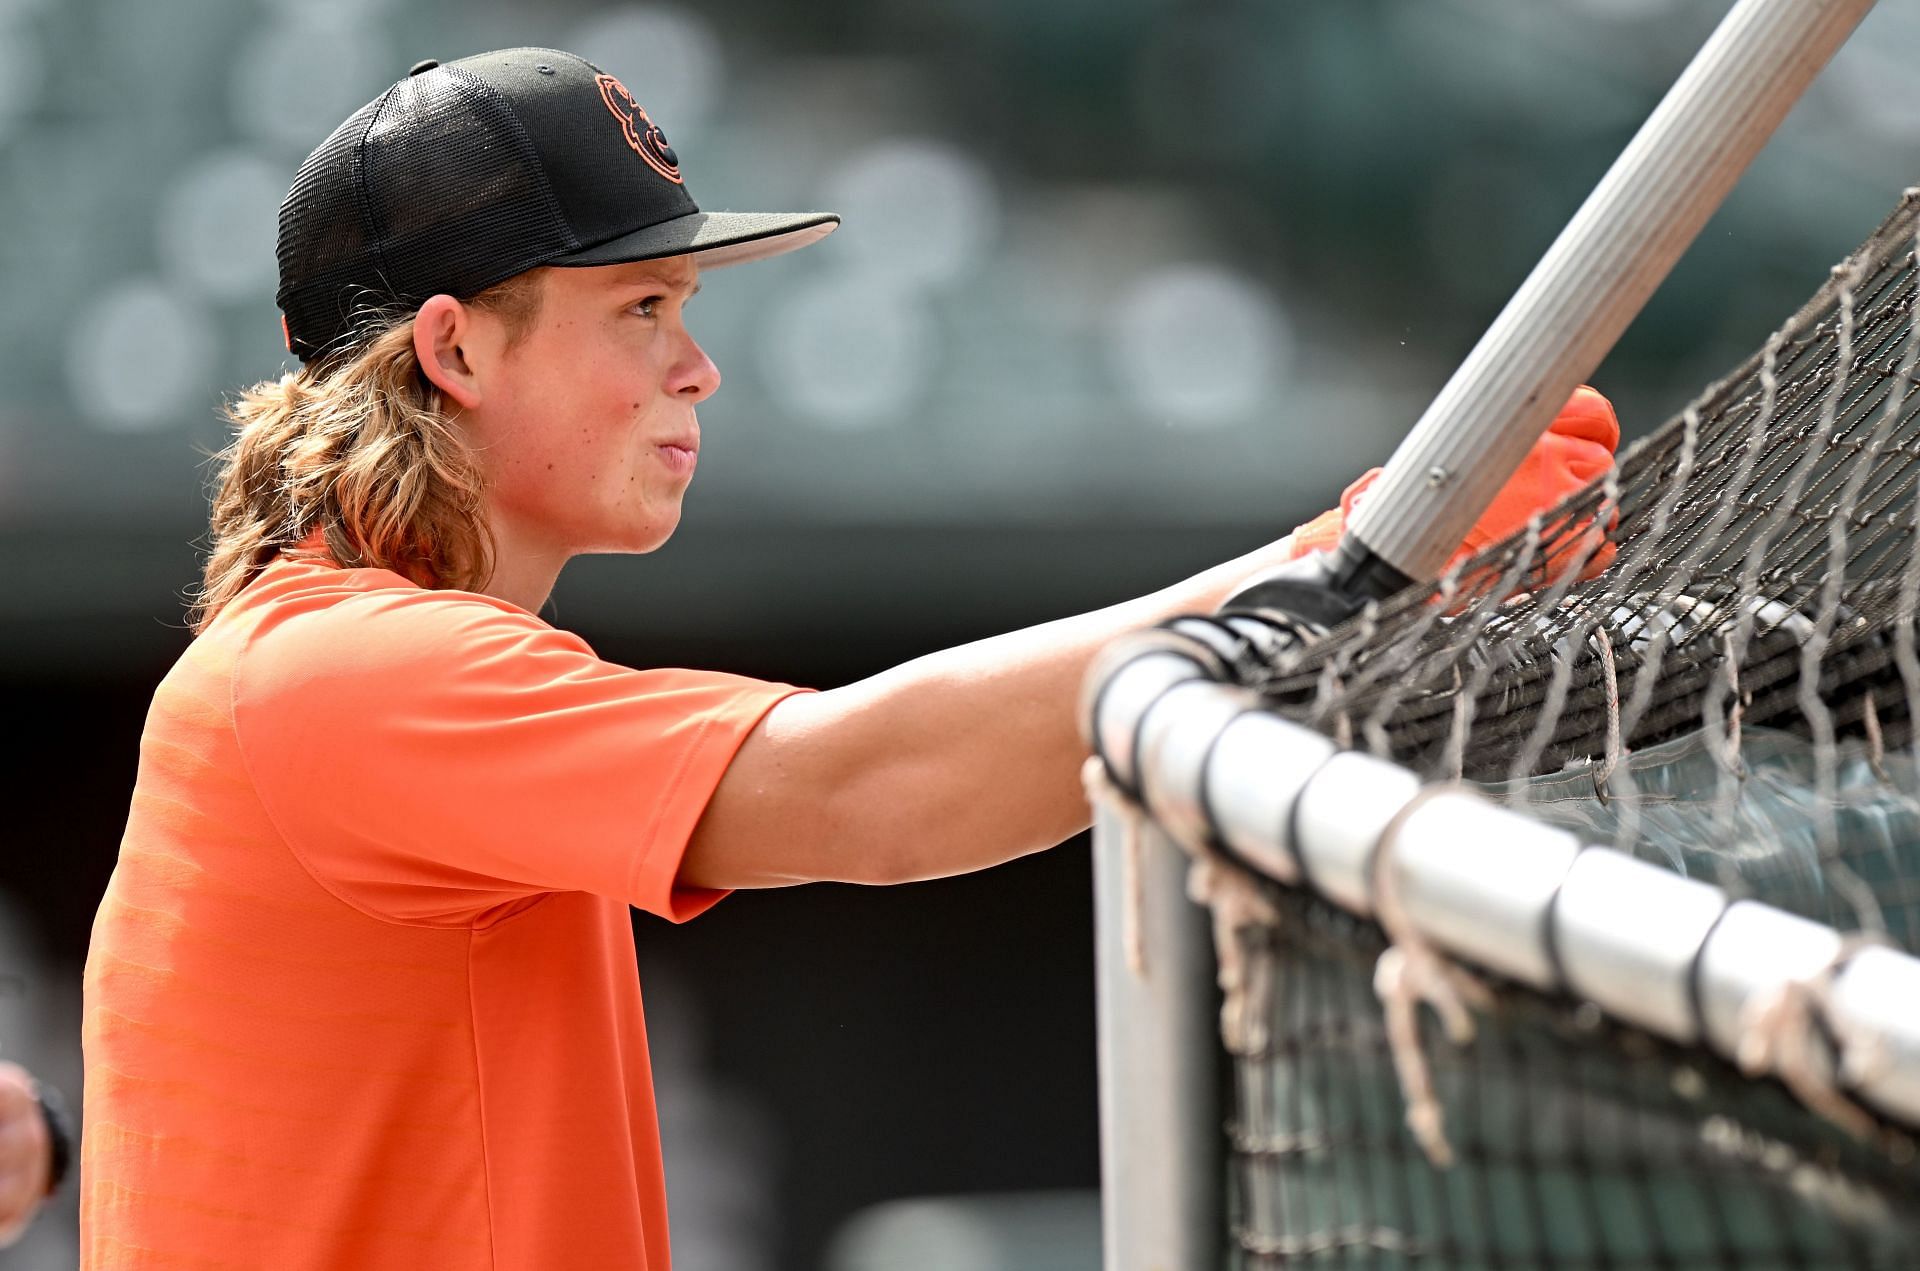 Baltimore Orioles Jackson Holliday watches batting practice before a game at Oriole Park at Camden Yards